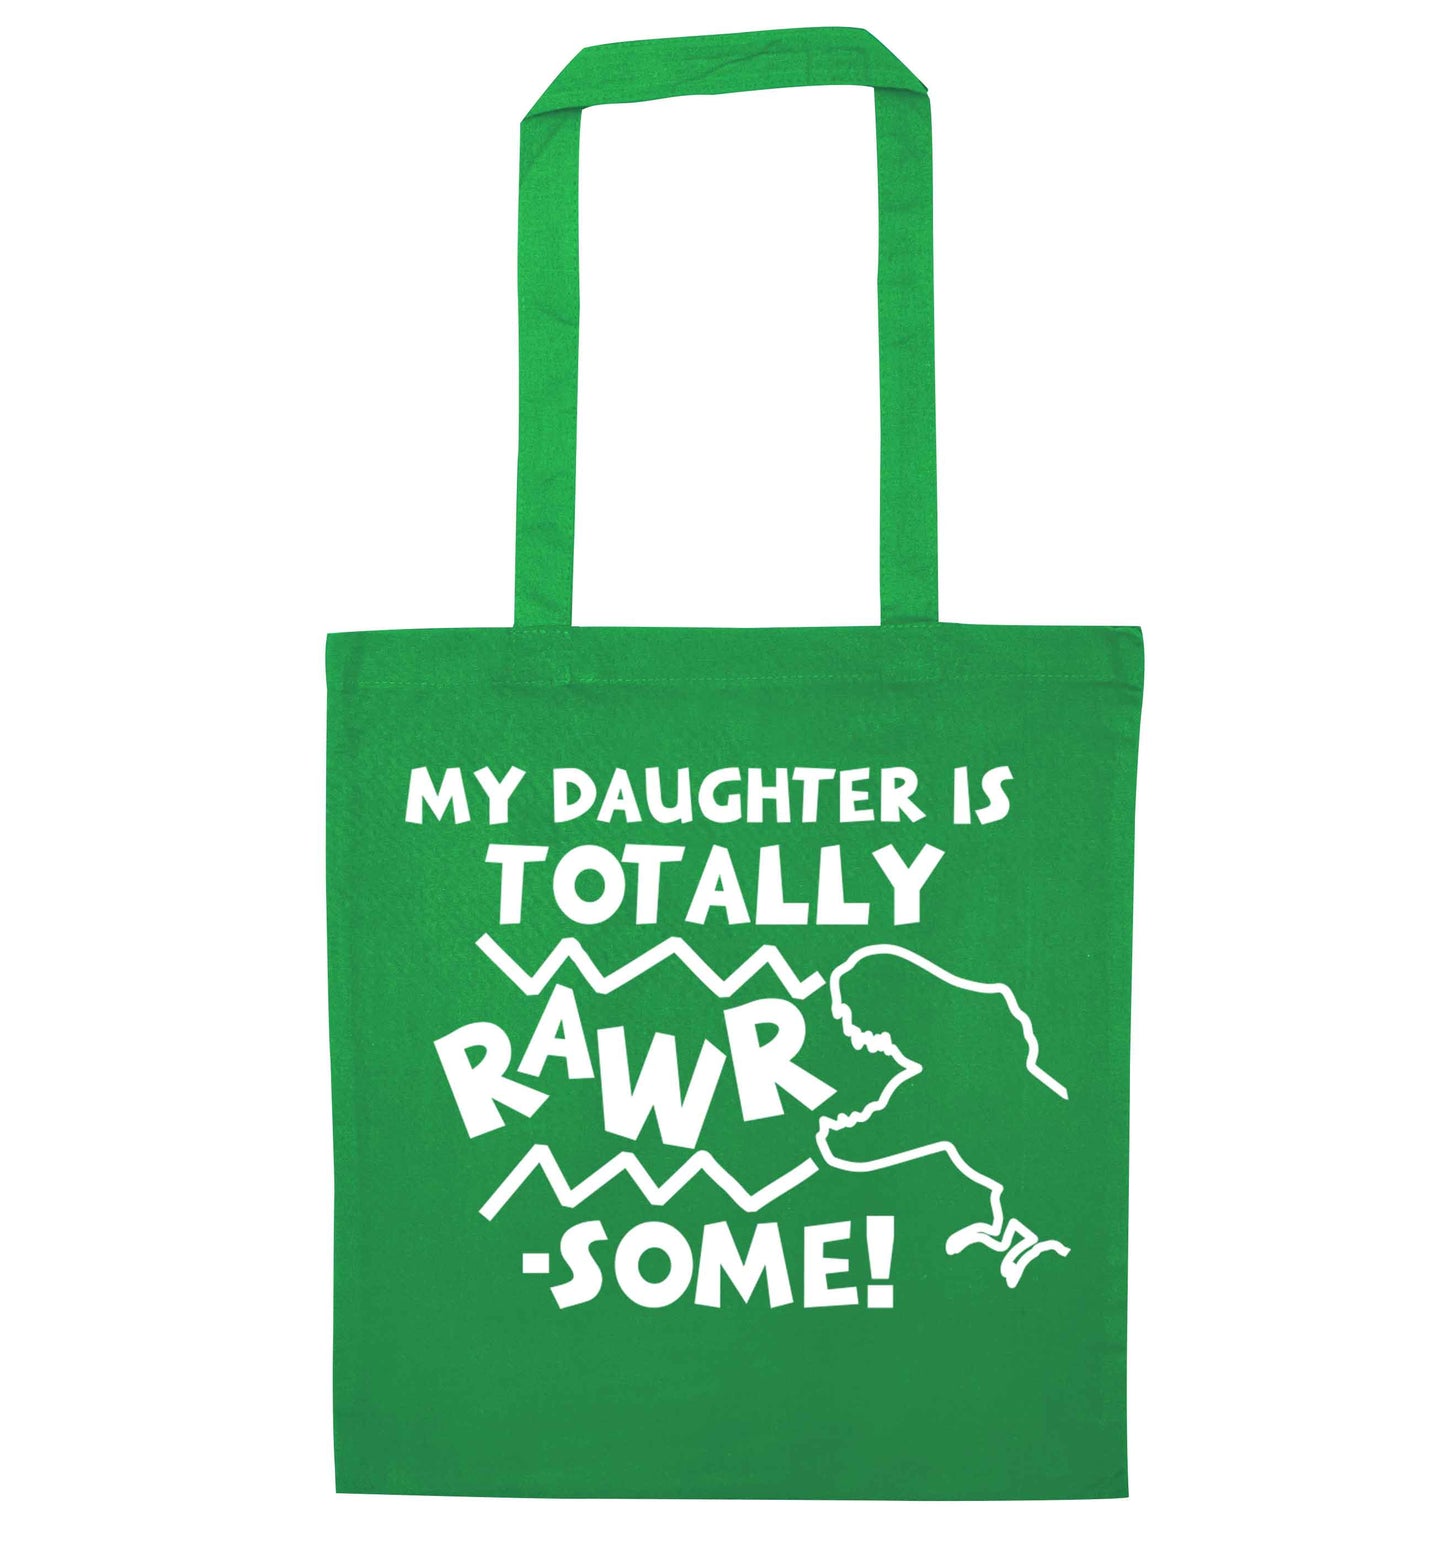 My daughter is totally rawrsome green tote bag